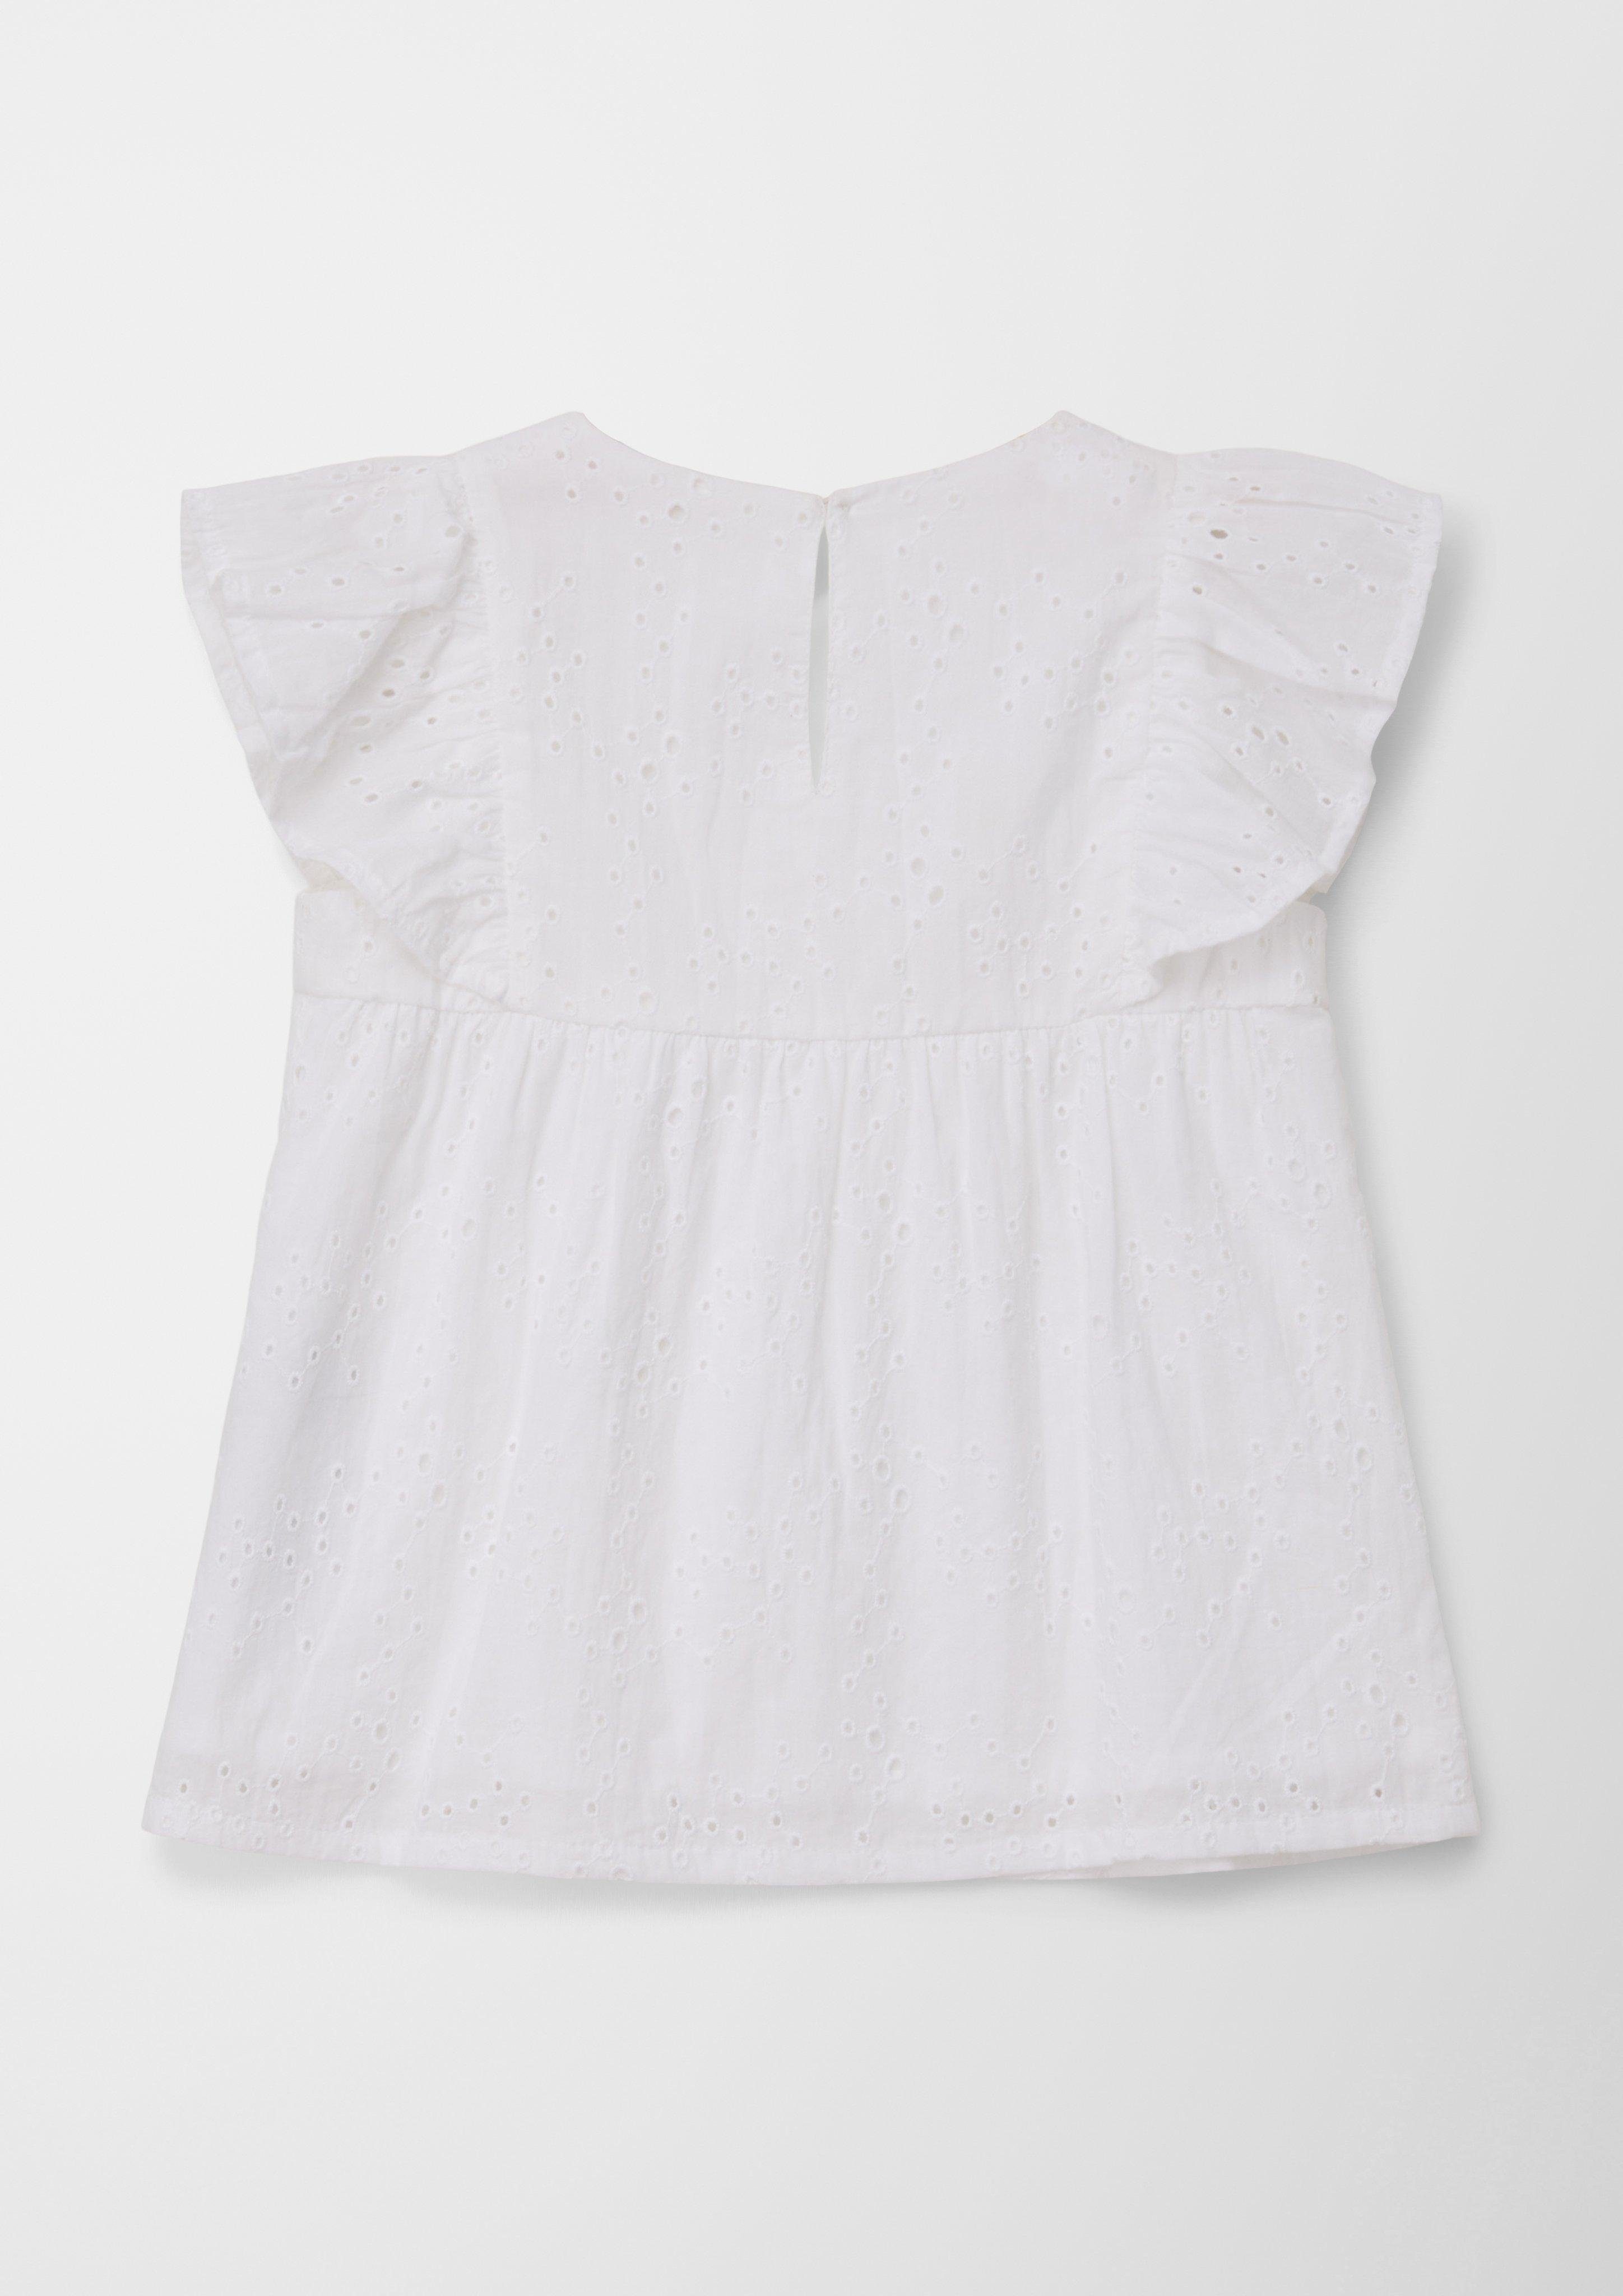 aus Anglaise Raffung s.Oliver Broderie Kurzarmbluse Bluse